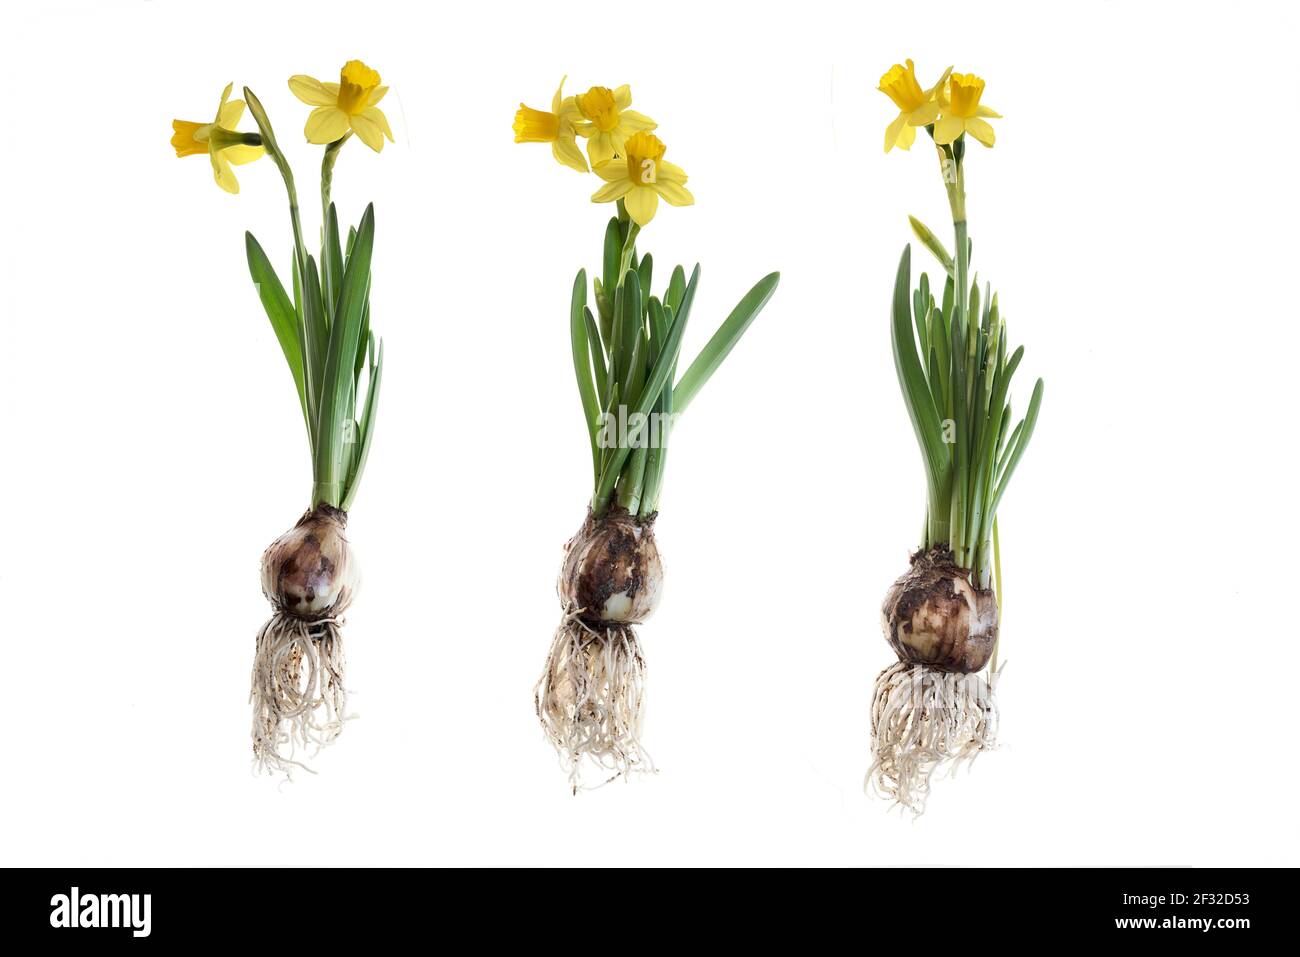 Daffodils (Narcissus) on a white background, Germany Stock Photo